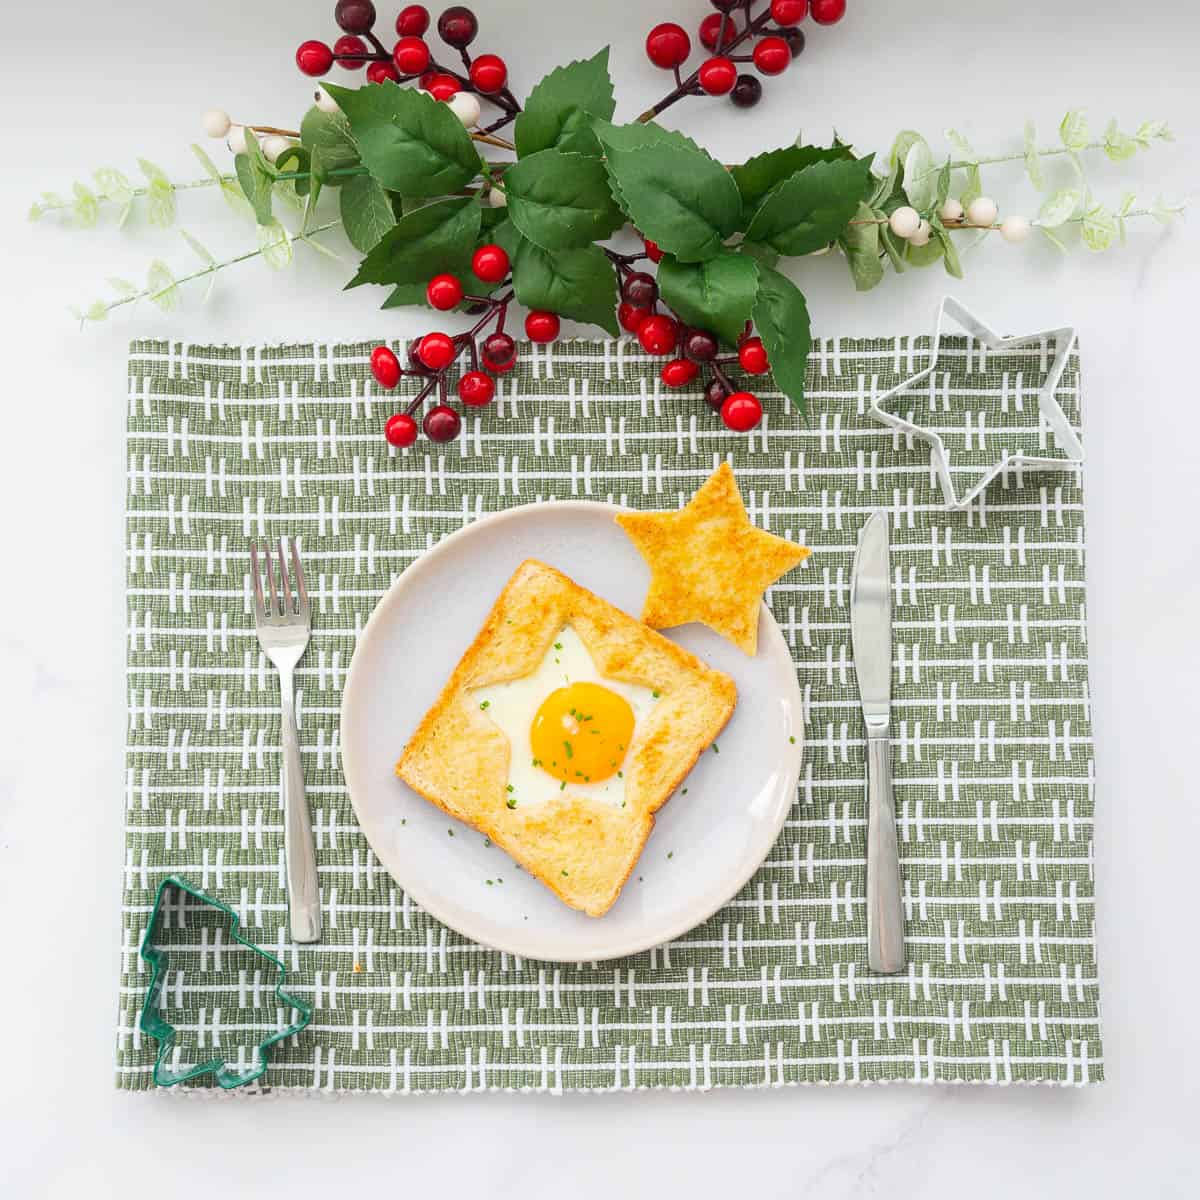 An egg cooked into the star shaped hole of a piece of toast on a plate with a golden star piece of toast to the side, sitting on.a green patterned placemat with a white green and red christmas decoration centrepiece above the placemat.